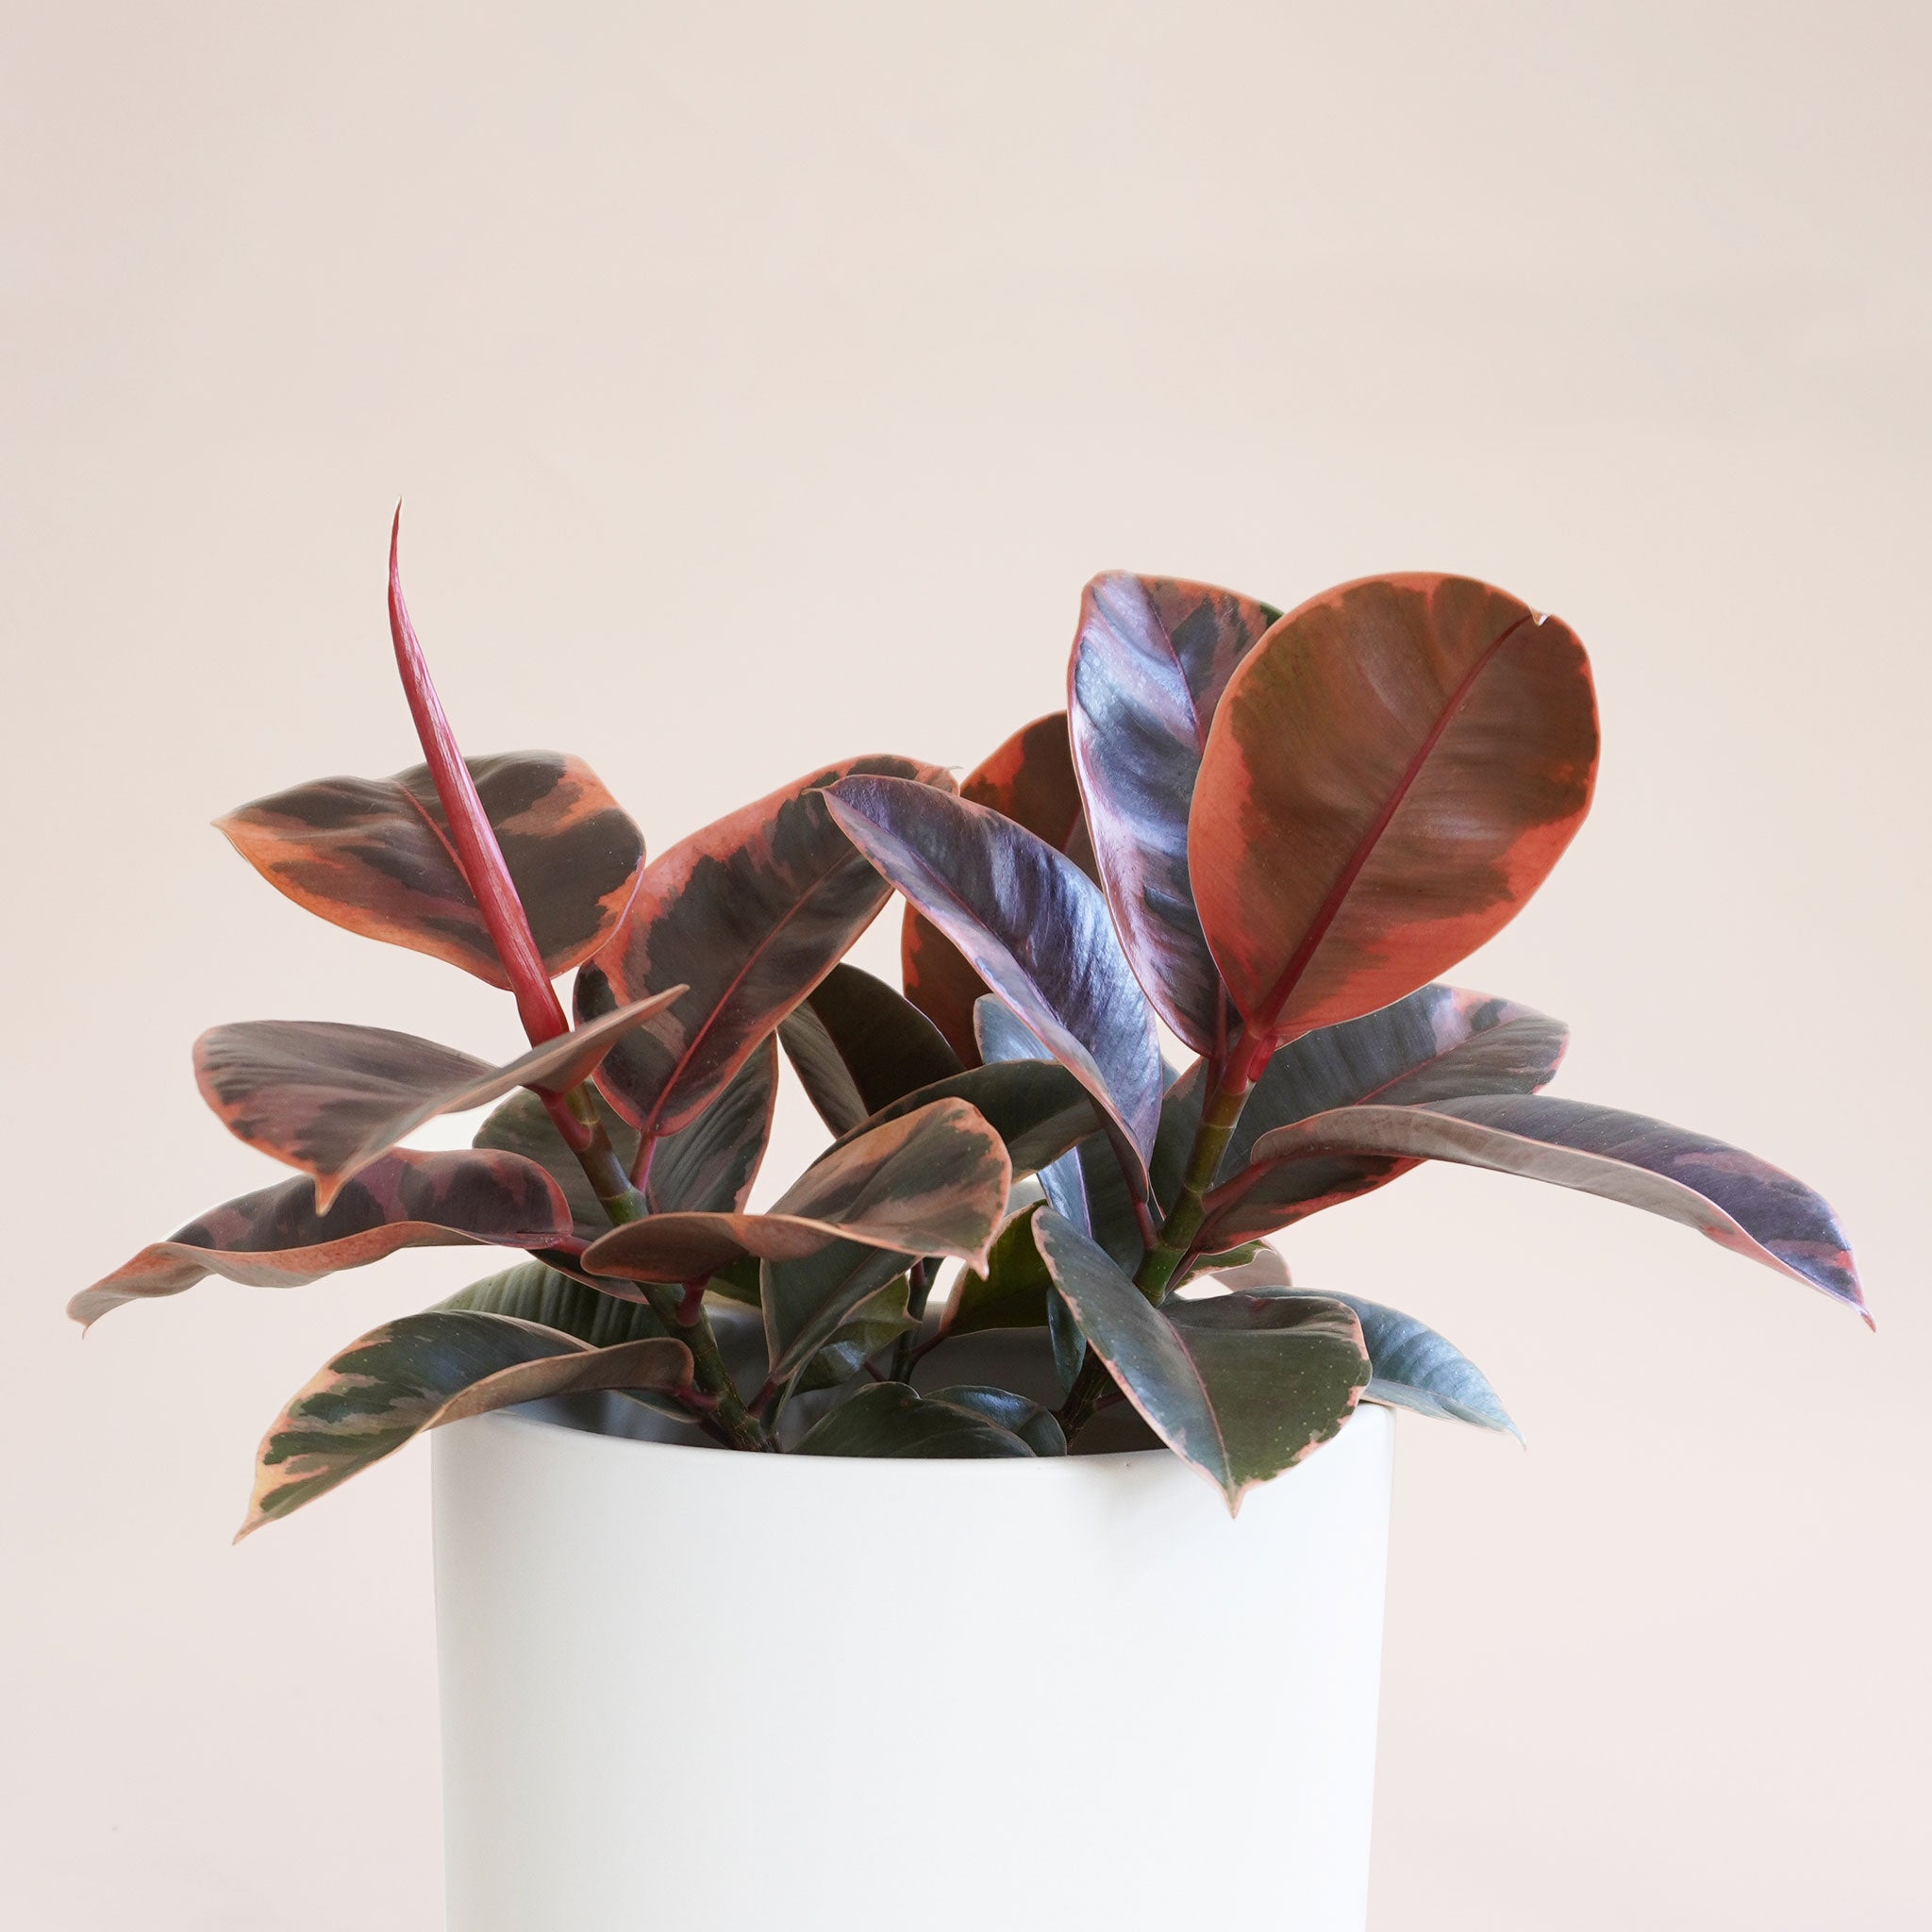 A house plant in a white pot that has rounded dark green leaves with a ton of reddish and pink variegation.